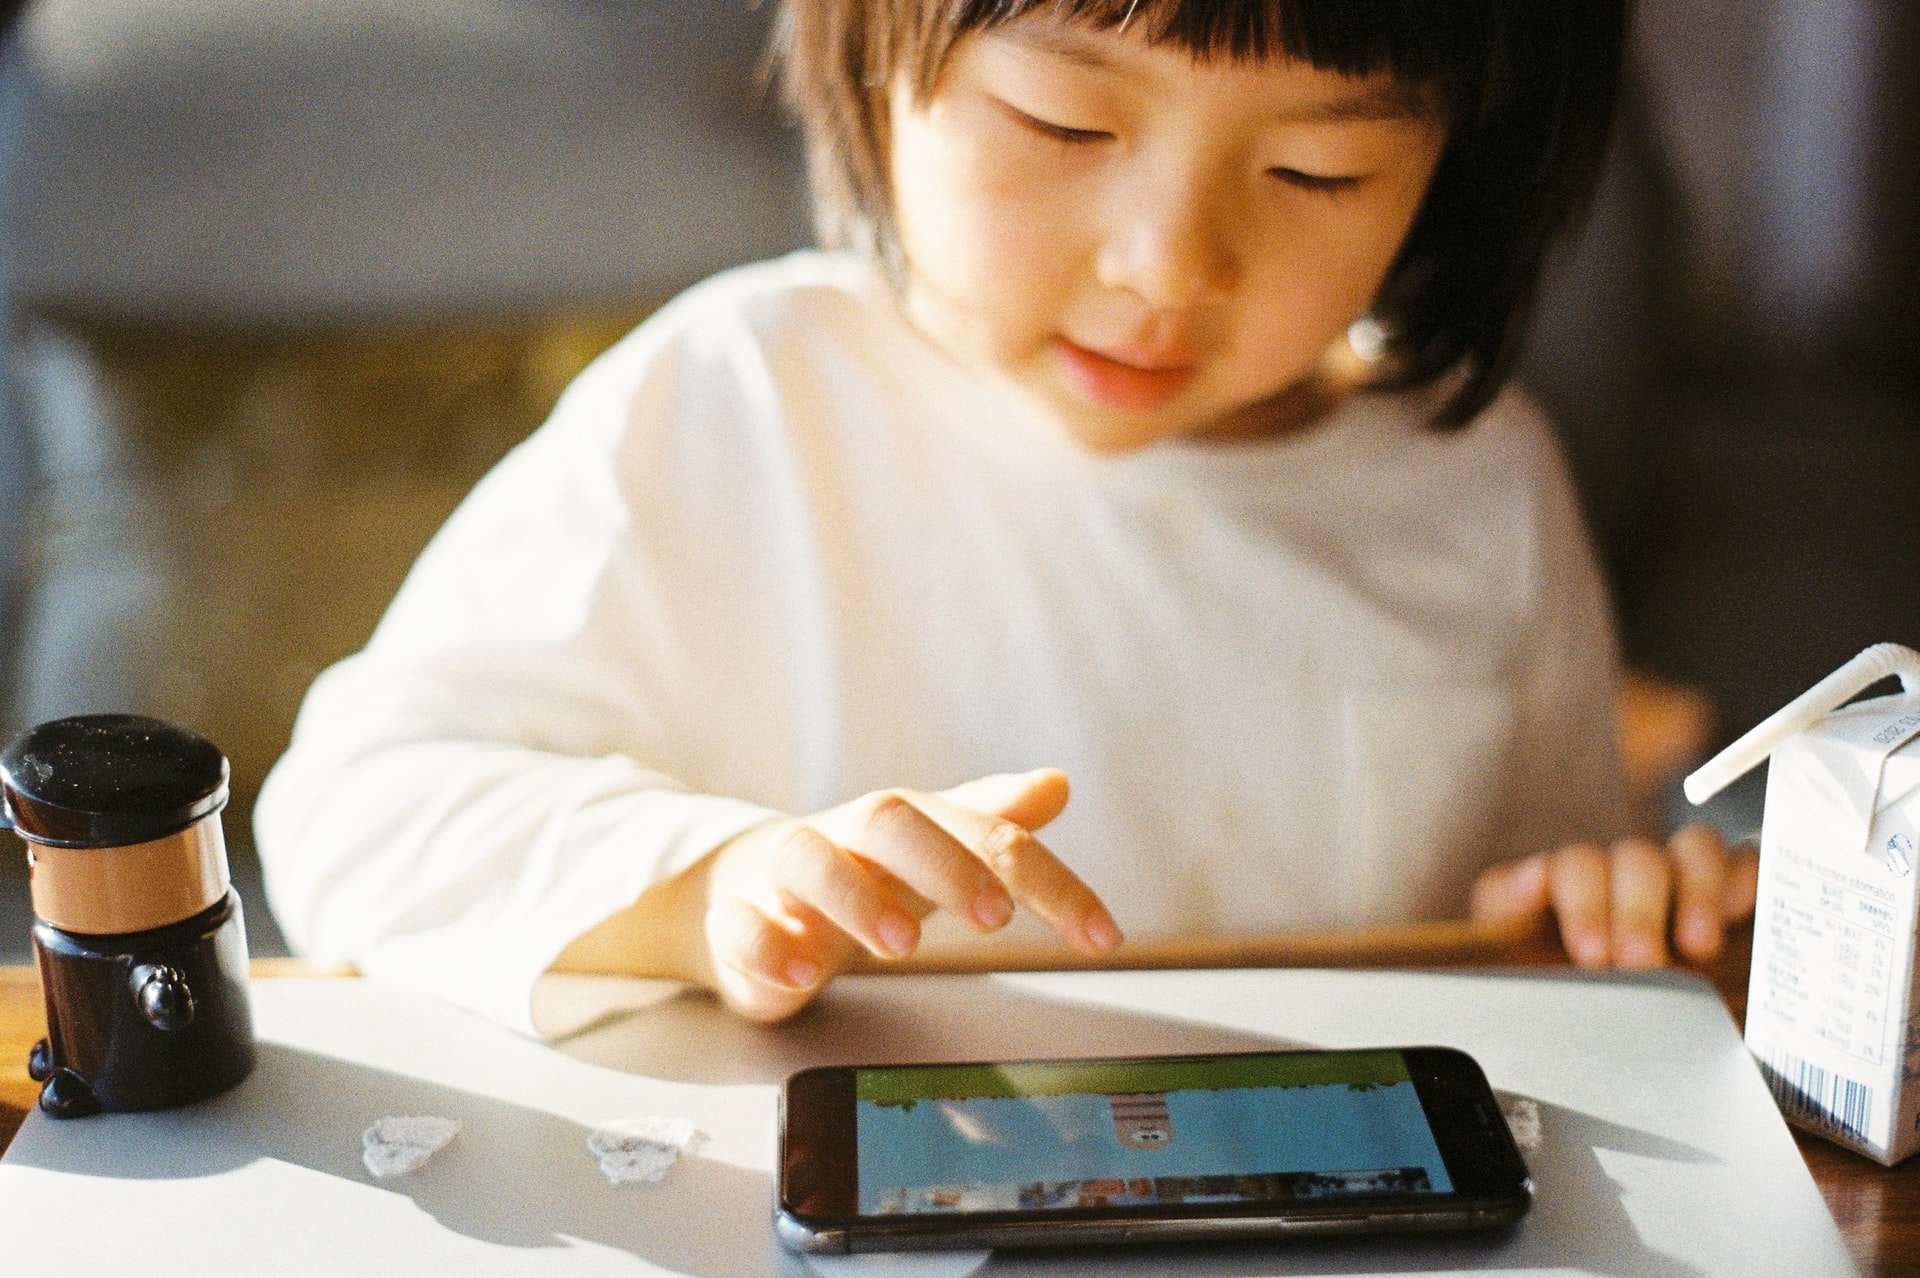 A little girl playing an online game on her tablet